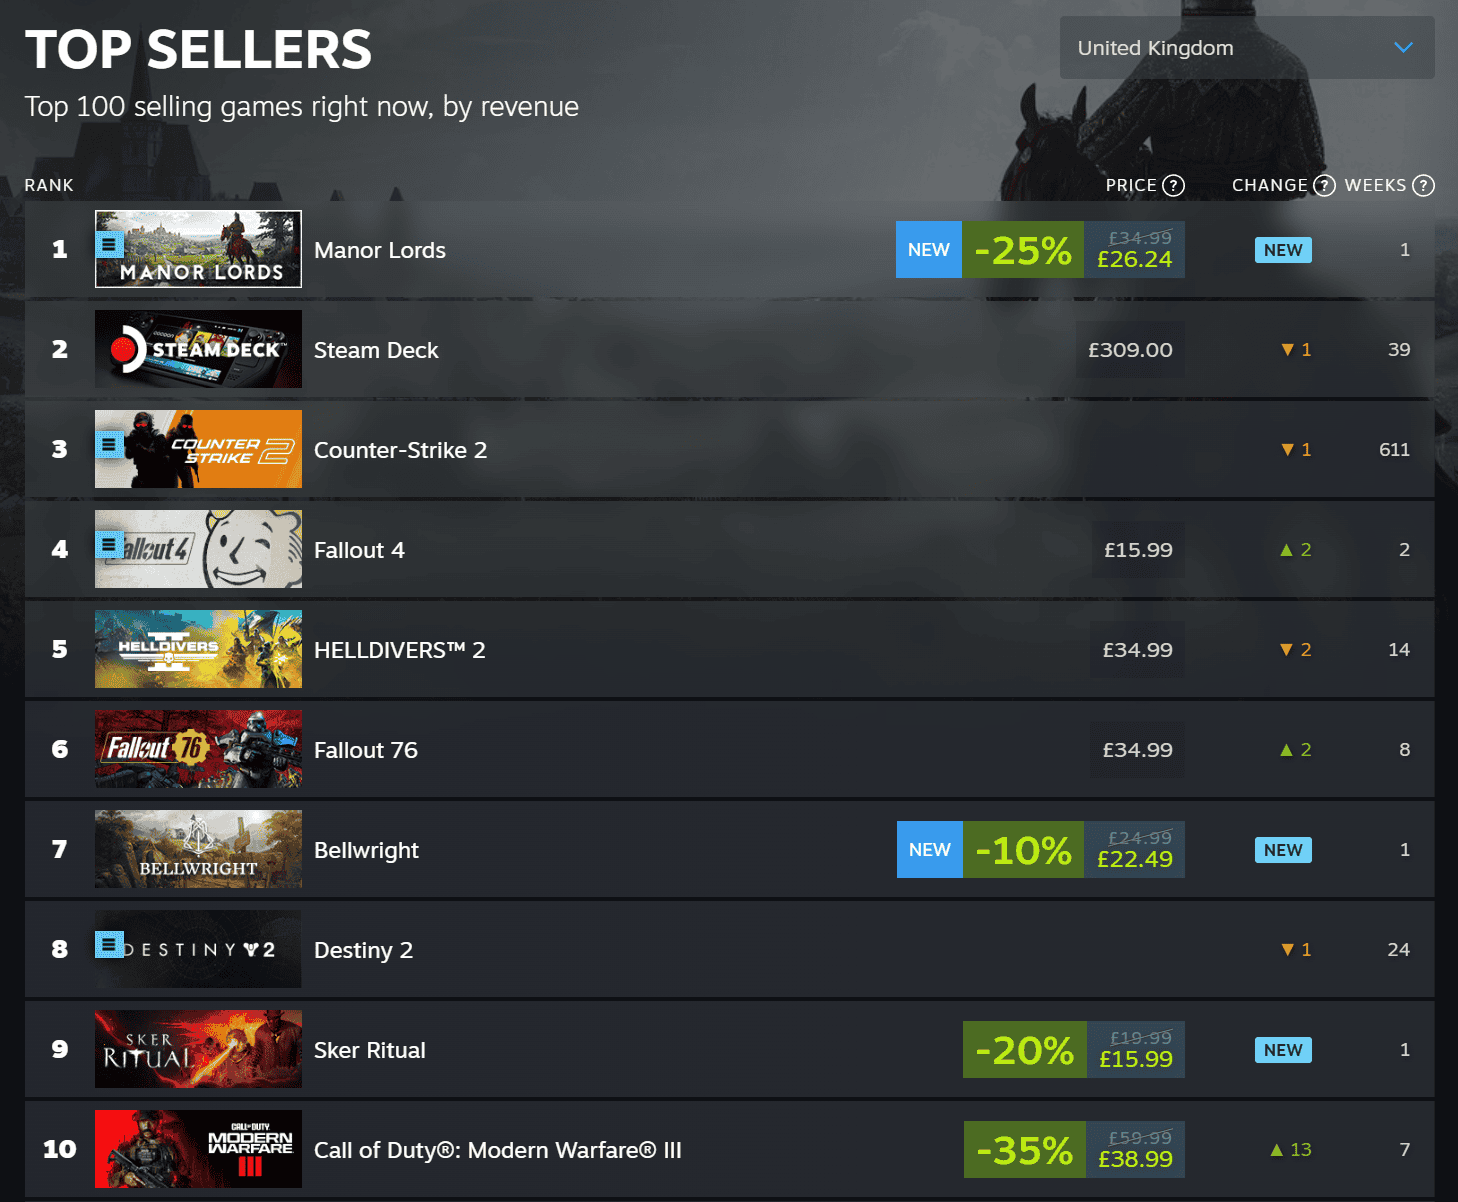 Screenshot of a top-selling video games chart, featuring Manor Lords topping the Steam charts upon release, showing game titles, prices, and revenue ranking changes, with icons indicating sales status.